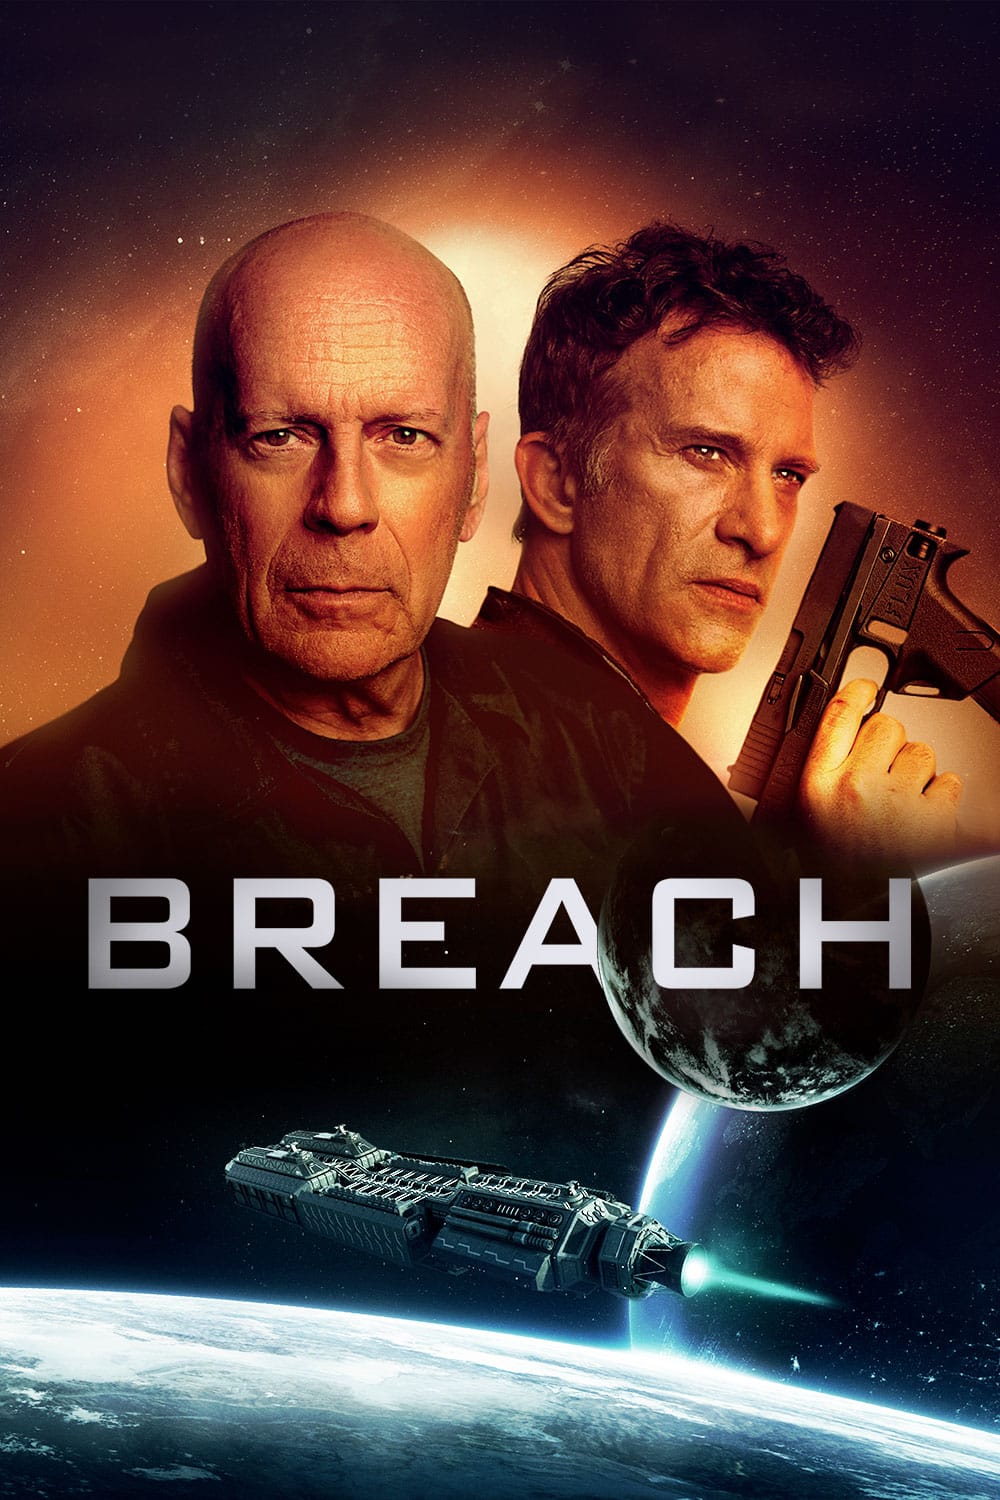 breach movie 2020 production cost